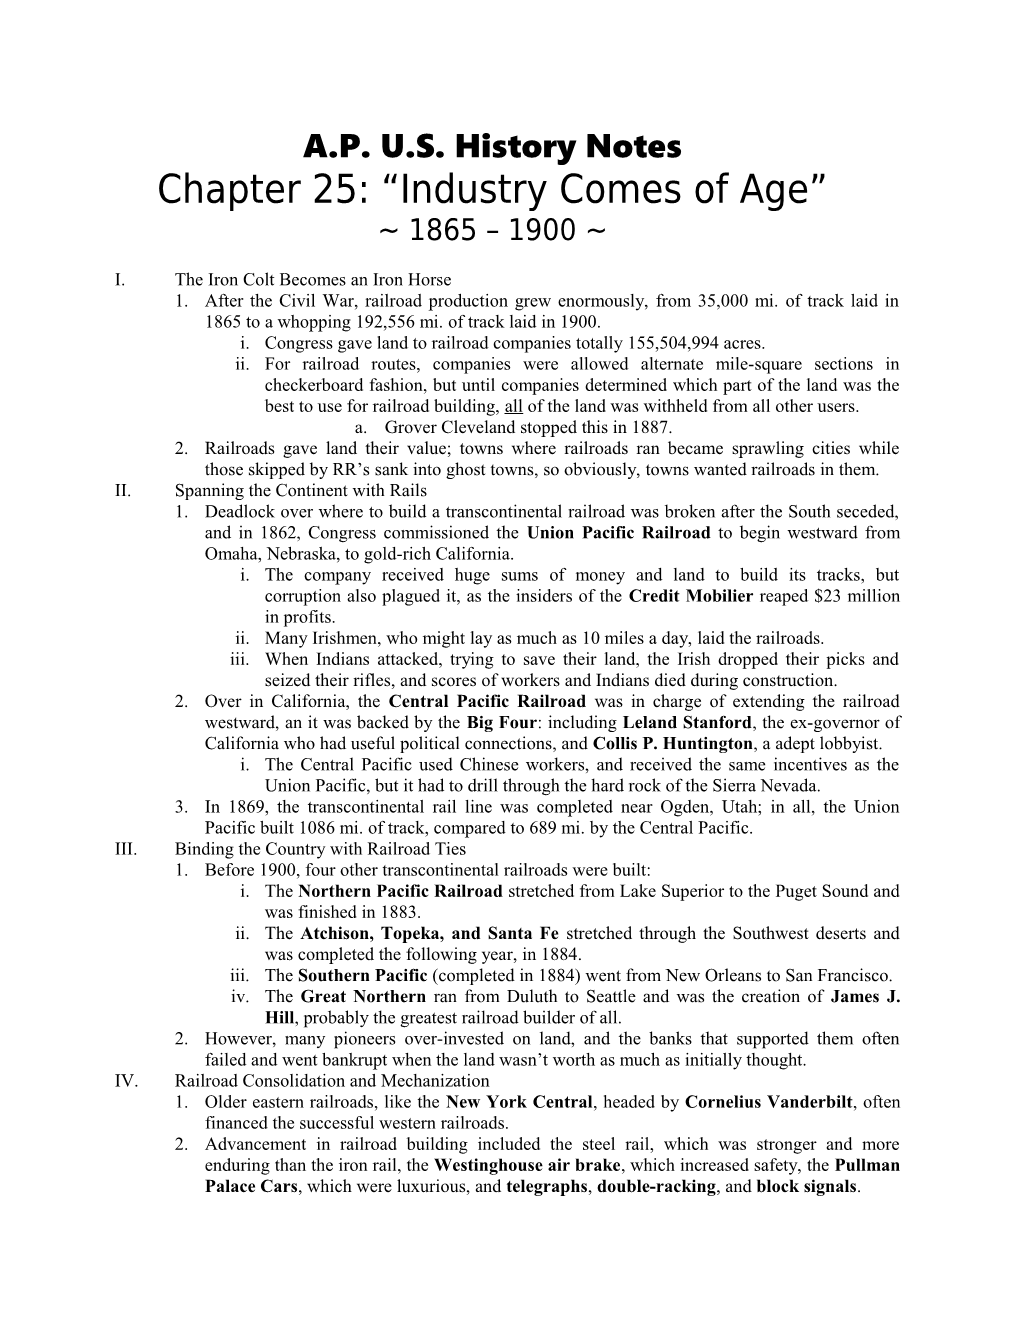 Chapter 25: Industry Comes of Age